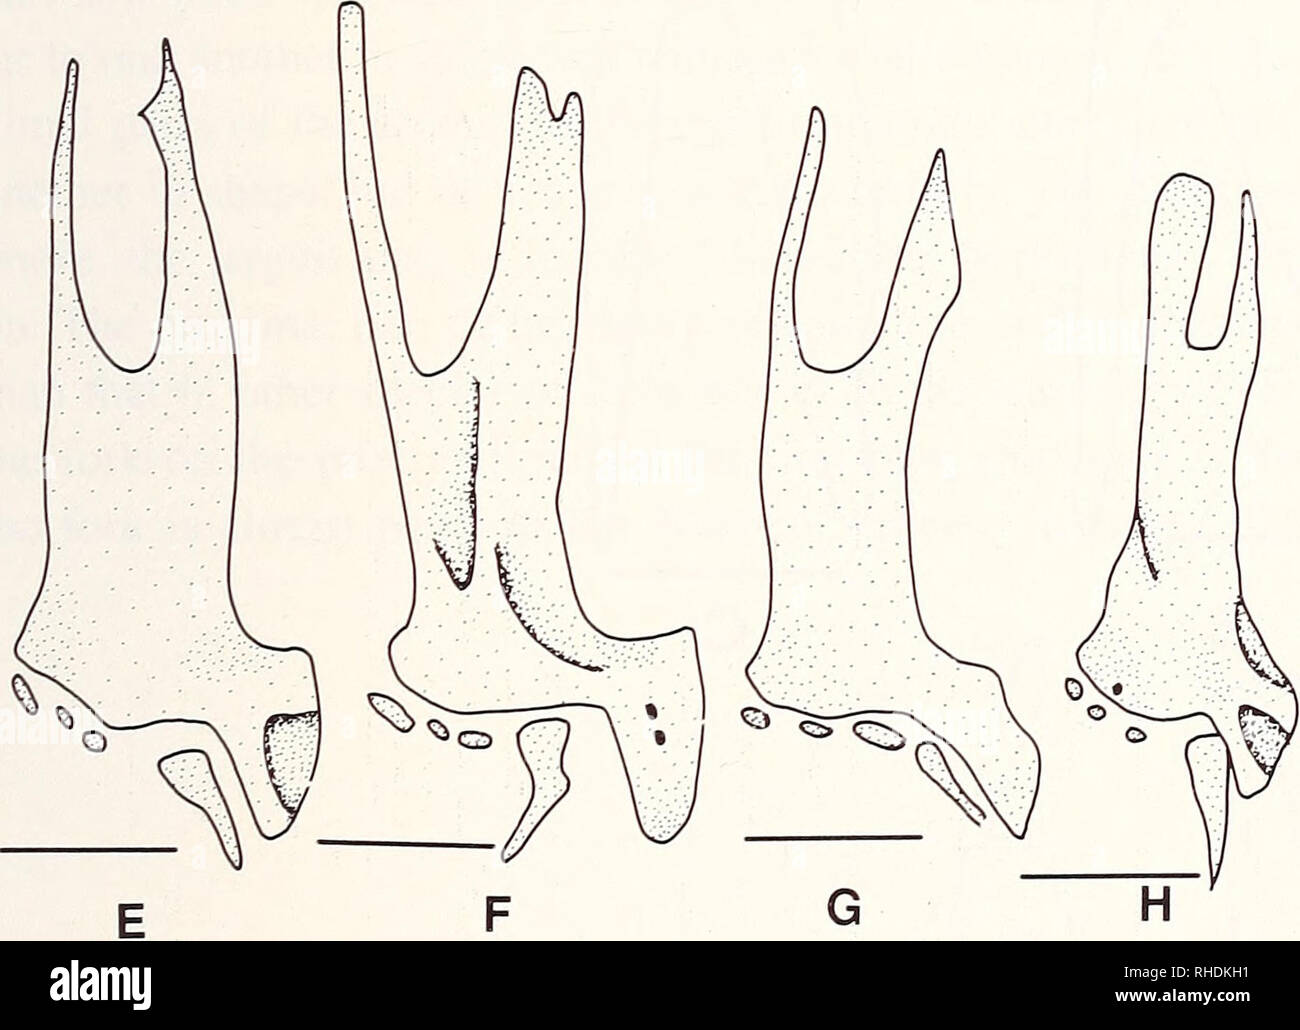 . Bonner zoologische Monographien. Zoology. Fig.89: Dorsal view of pelvic girdle of Phoxinus. A: P. pho- xinus (CNUC uncat., 76.0 mm TL); B: P. erythrogaster (KU 5773, 51.5 mm SL); C: P. neogaeus (KU 8521, 53.0 mm SL); D: P. issykkulensis (P-10696, 42.4 mm SL); E: P. cumberlandensis (KU 18934, 52.0 mm SL); F: P. oreas (KU 3259, 55.0 mm SL); G: P. tennesseensis (UT 44.5274, SL 50.0 mm SL); H: P. eos (KU 12255, 43.0 mm SL). Scale bars = 1 mm. Pelvic girdle and fin The pelvic girdle (Fig.89A-H) is composed of a single, expanded basipterygium. Anteri- orly, it is forked, thus two pelvic plates, th Stock Photo